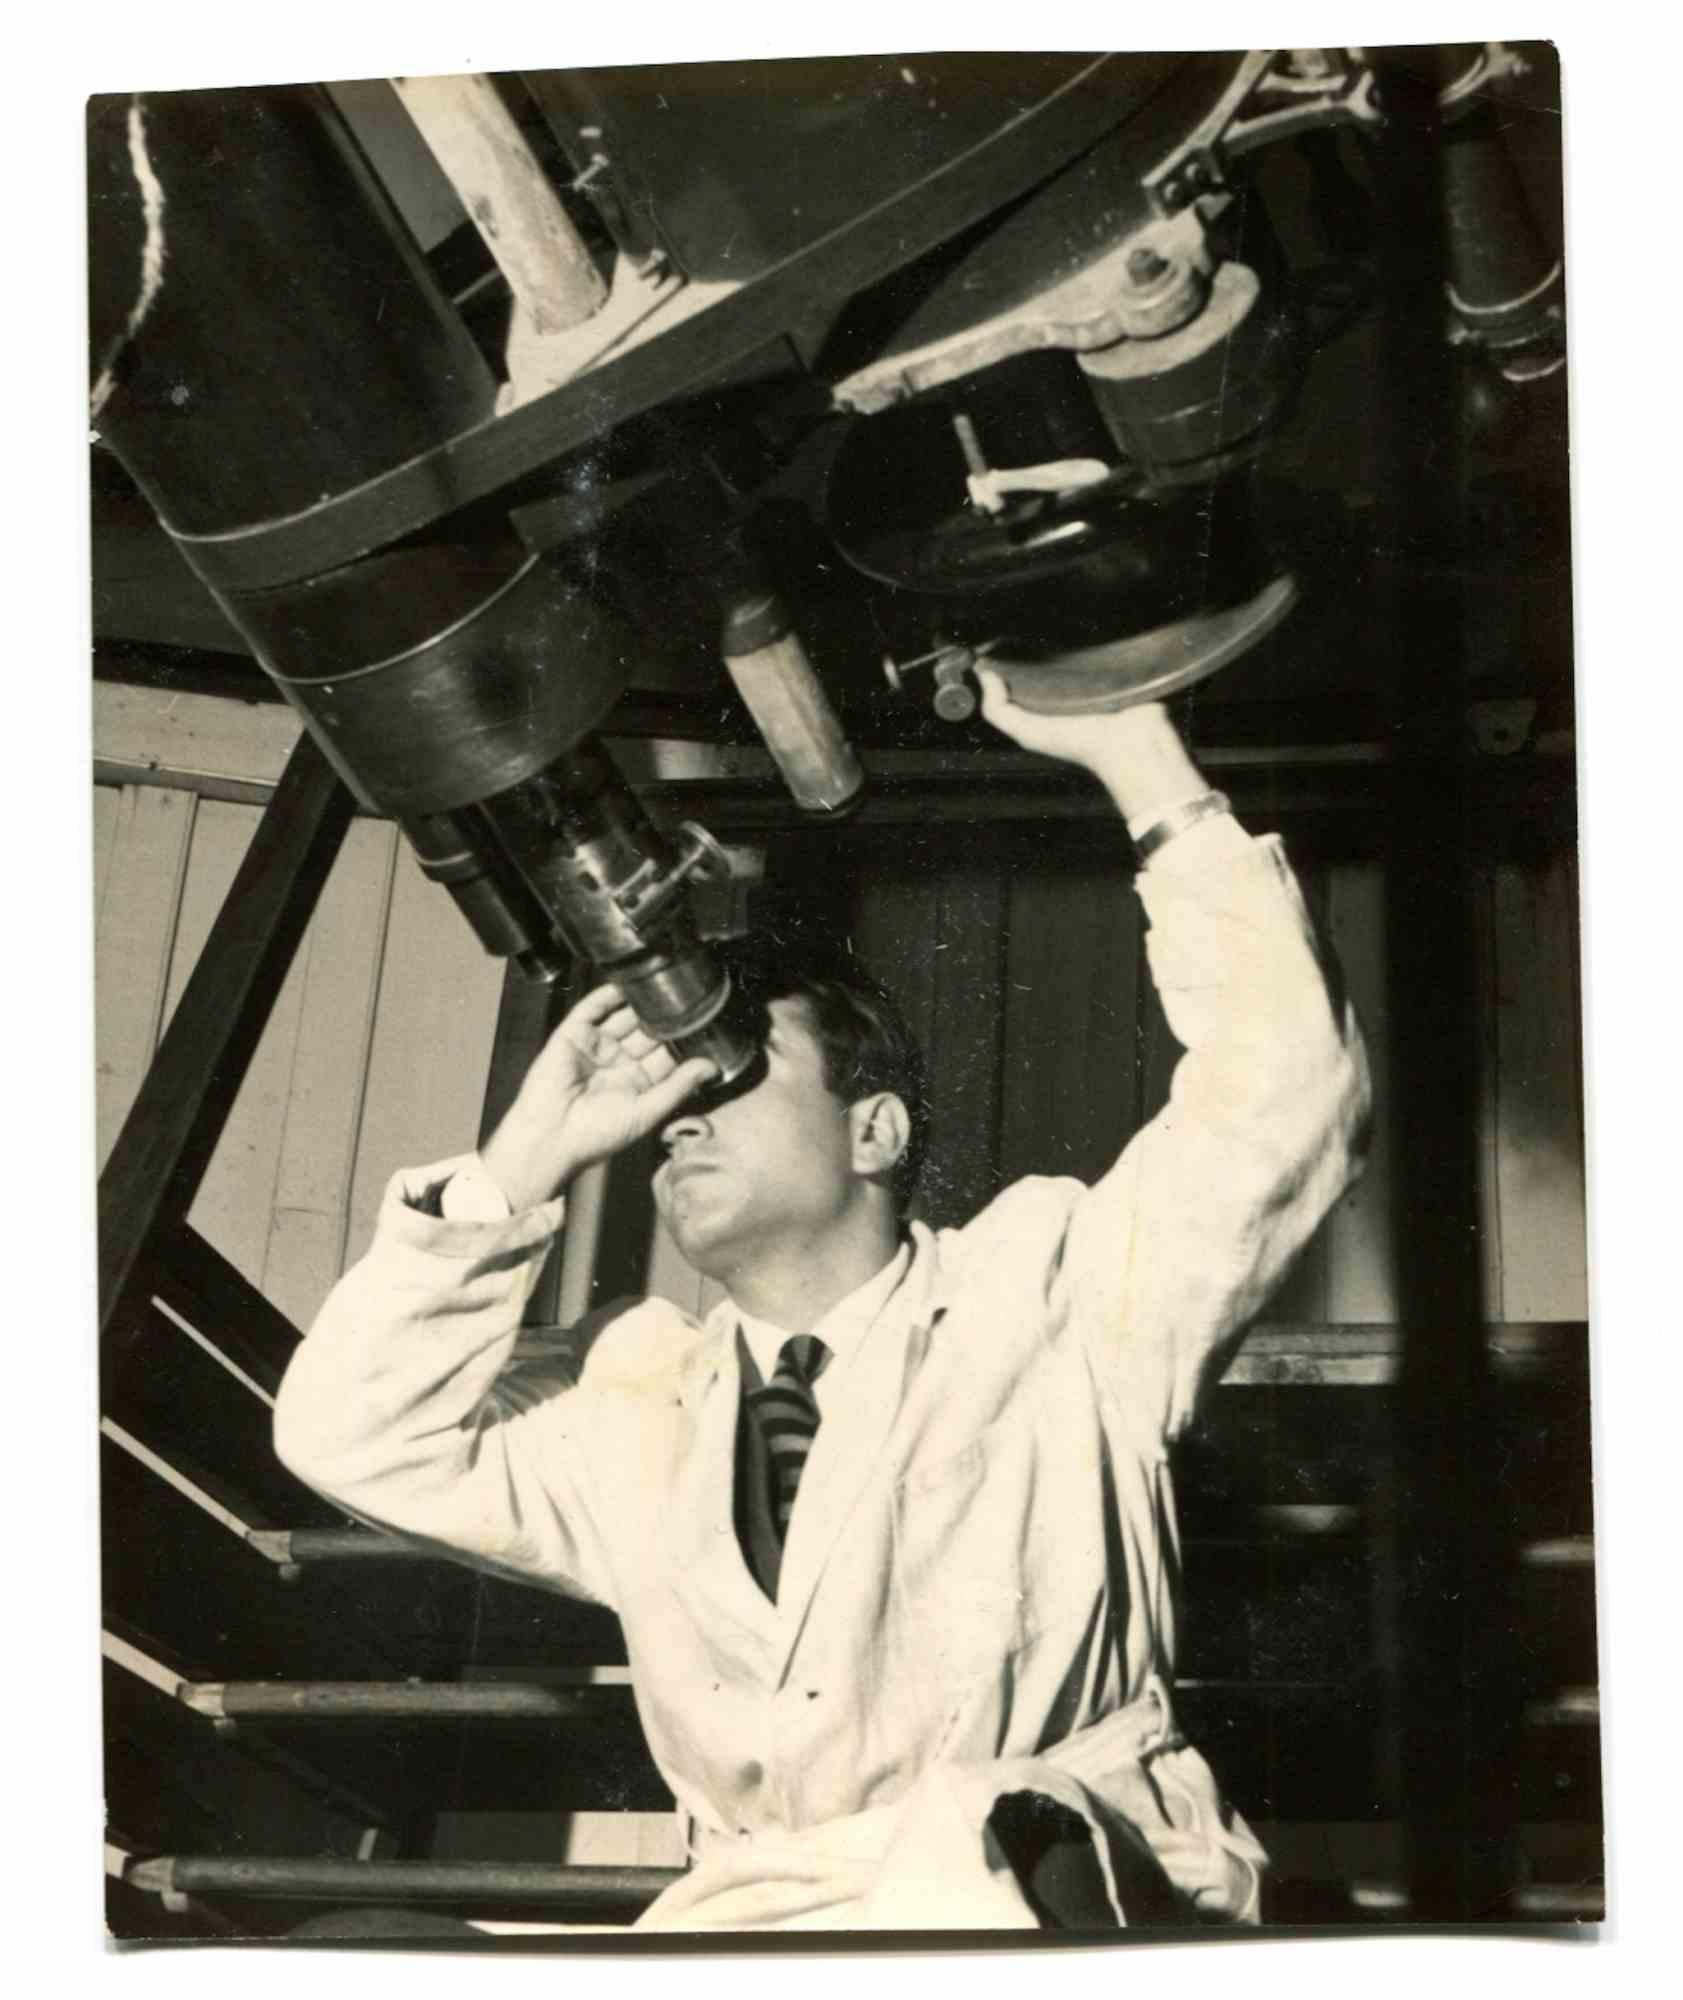 Unknown Figurative Photograph - Old Days - Astronomer - Vintage Photo - 1970s